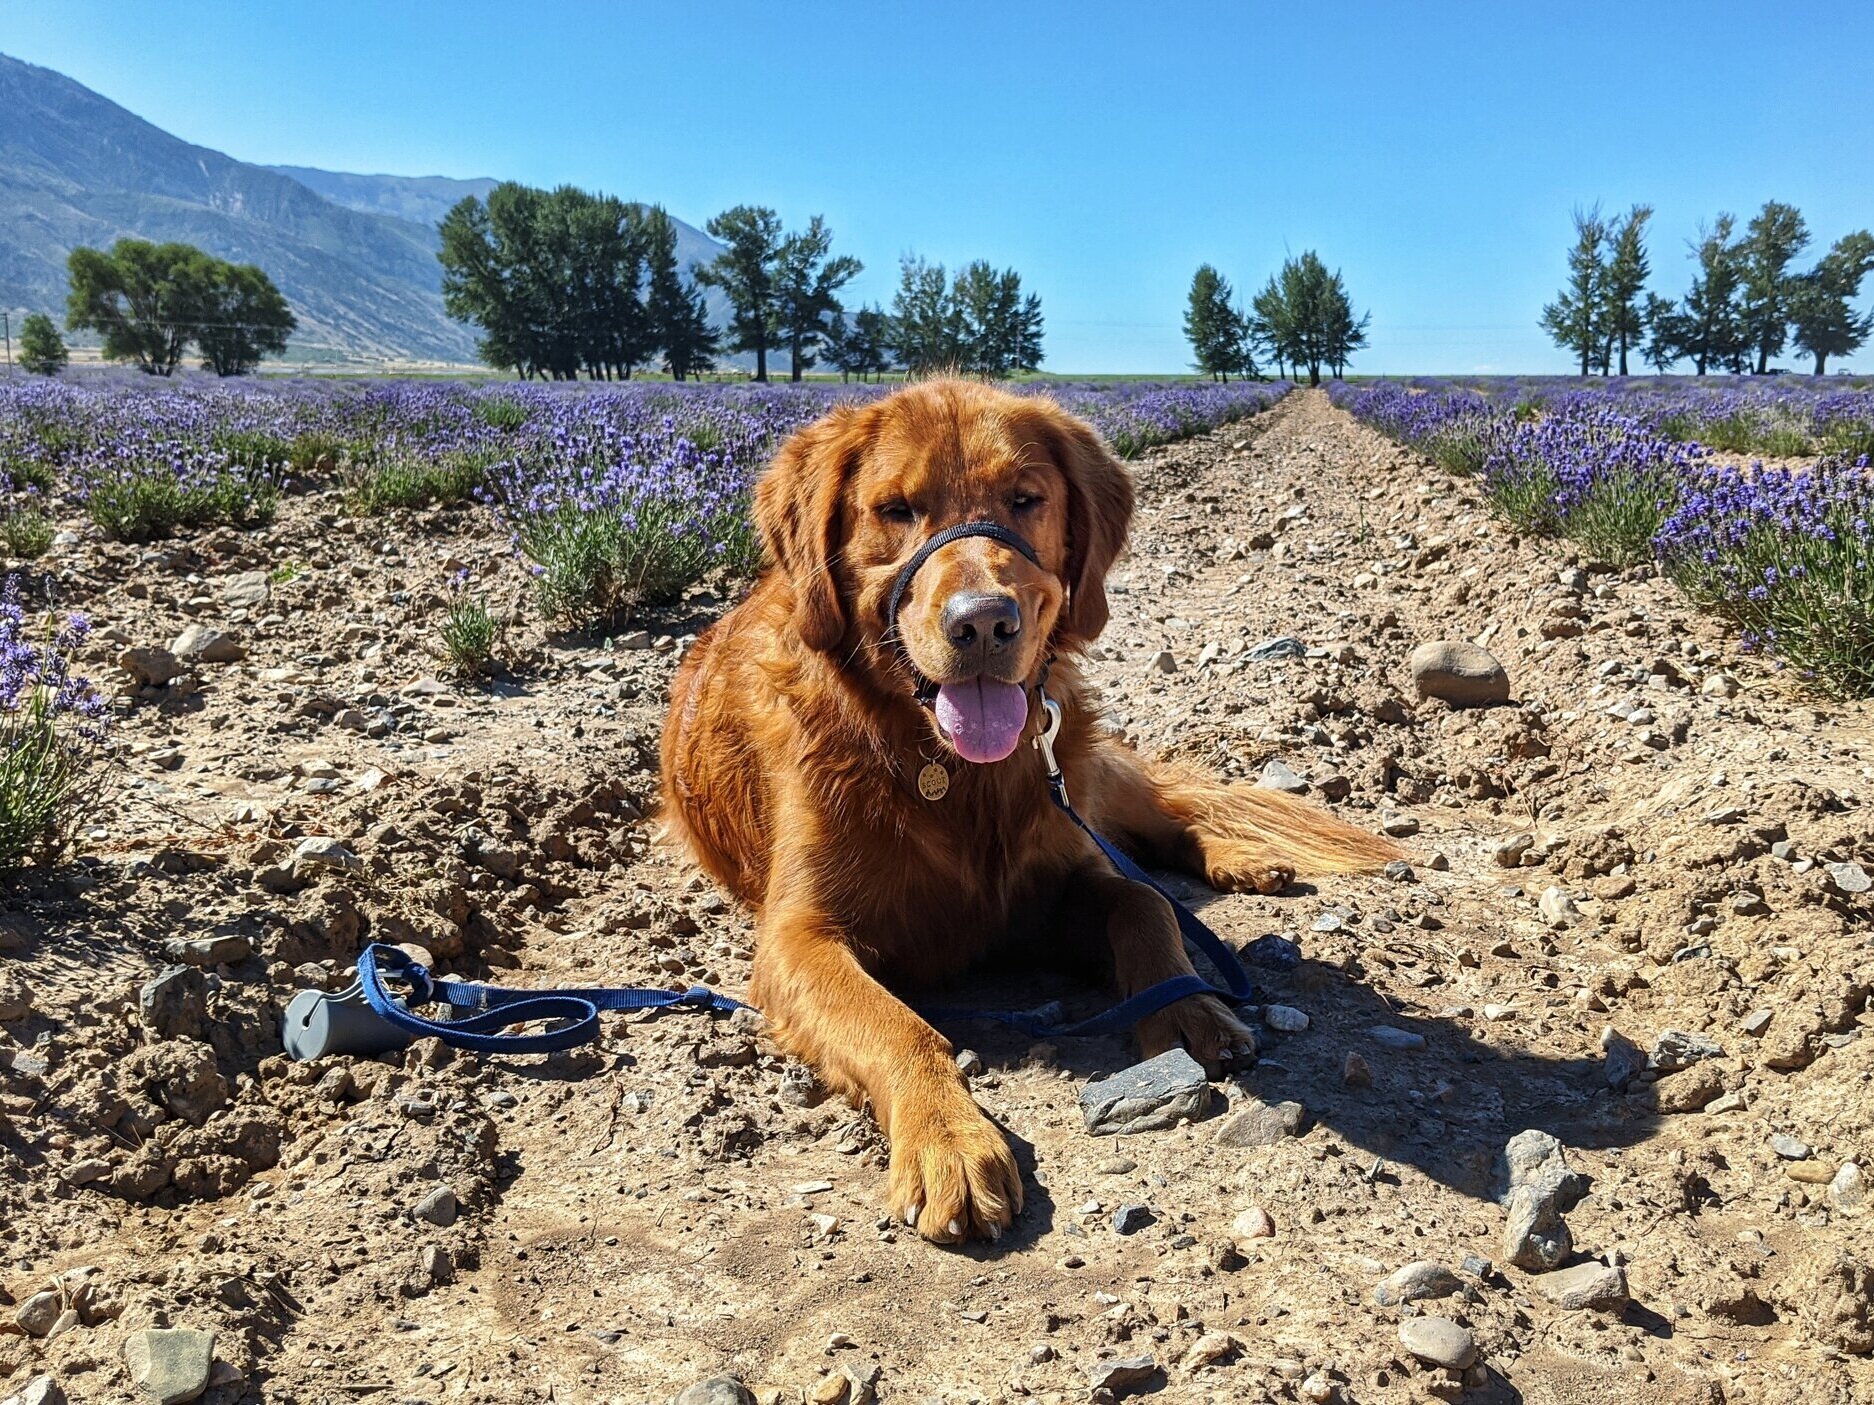 Golden retriever Scout smiles as he lays in a fully bloomed lavender field